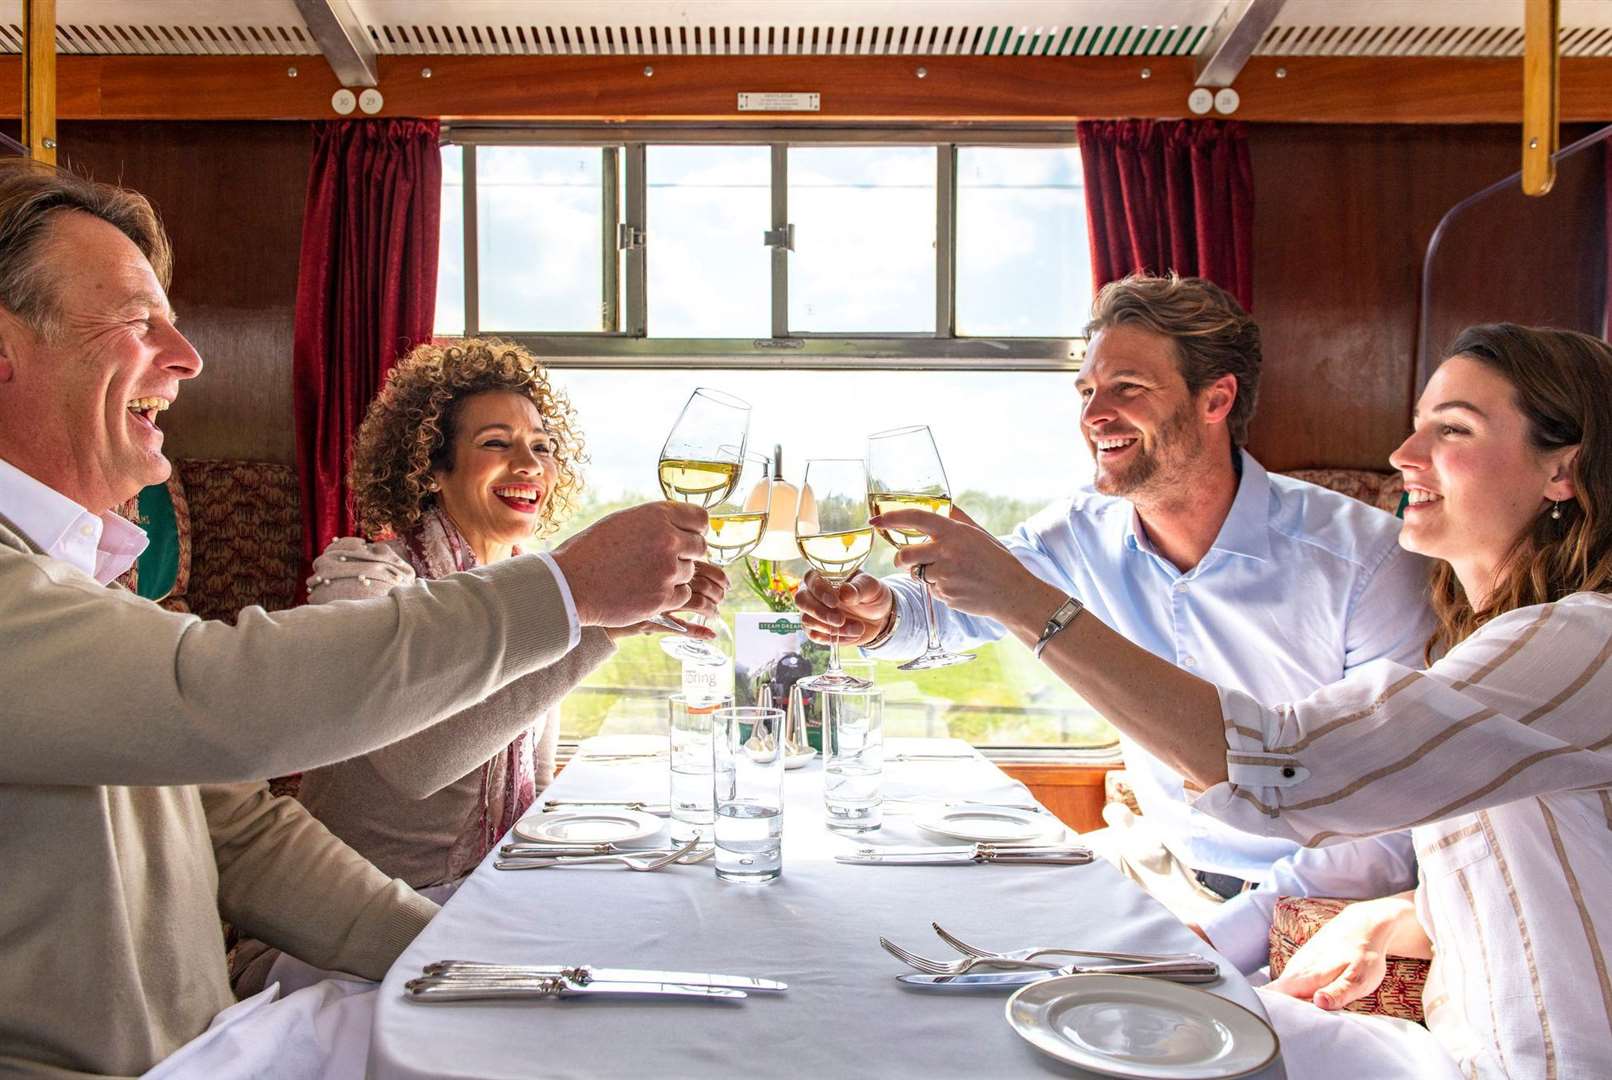 The Pullman-style dining option costs £195 per person. Picture: Steam Dreams